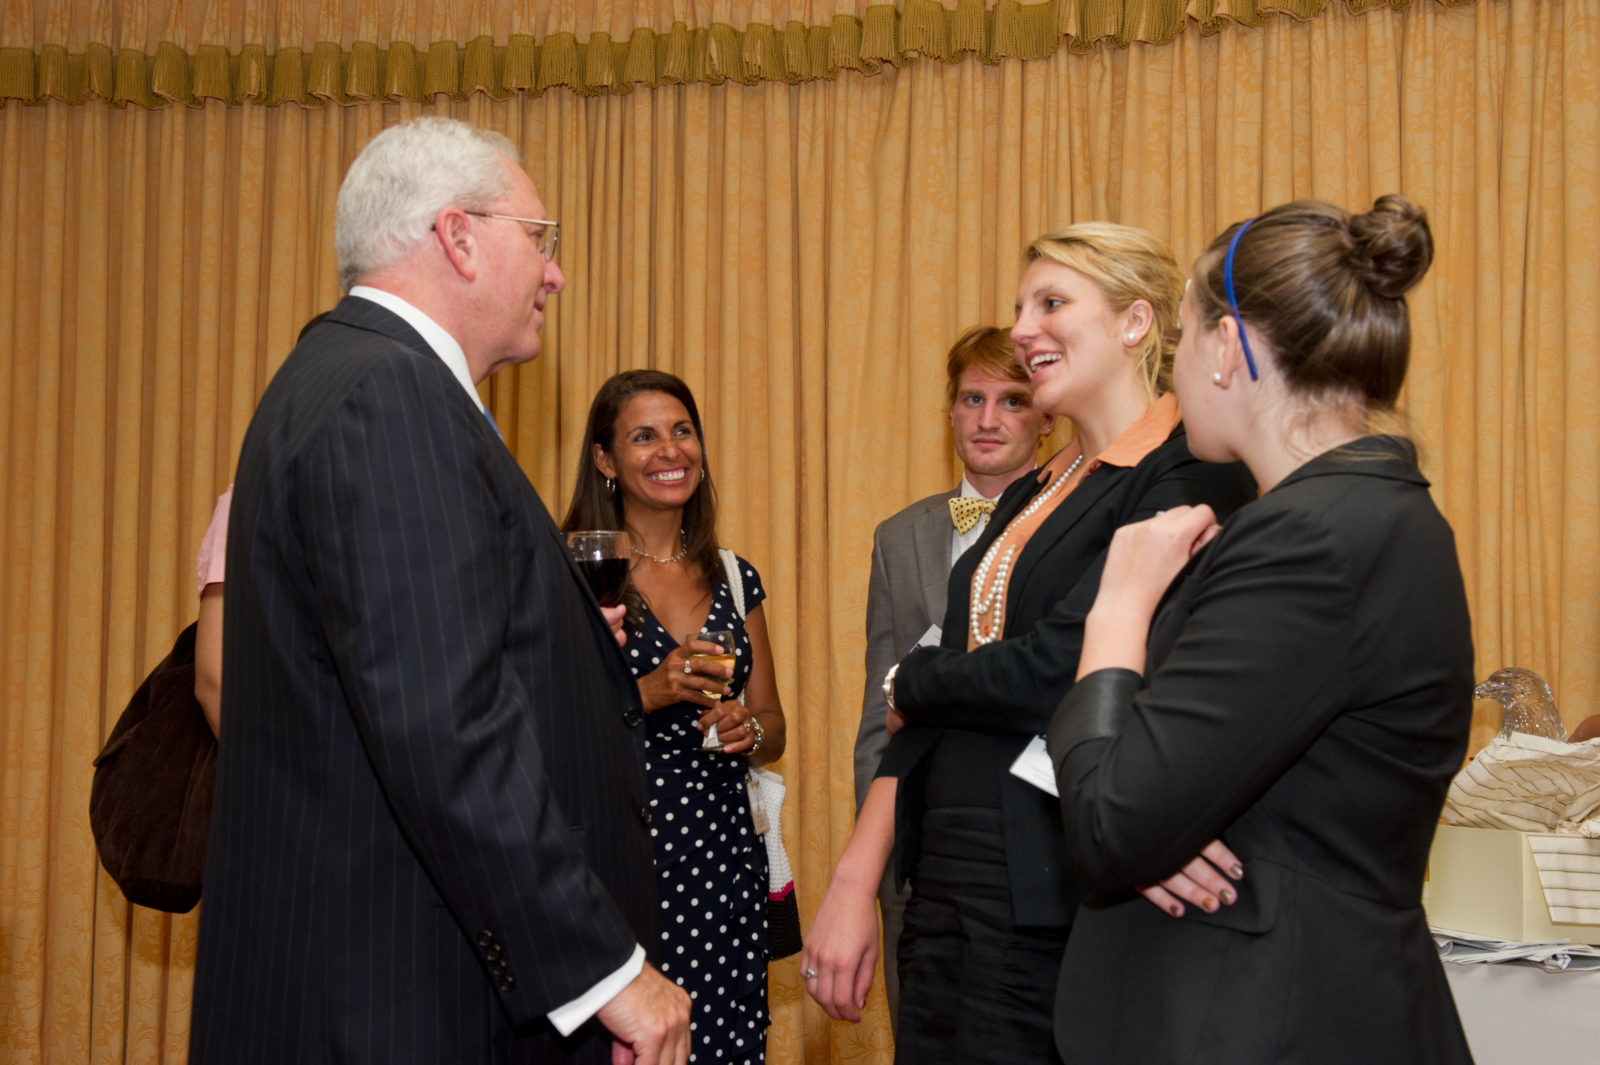 Award recipient Otto Reich speaks with TFAS students following his acceptance address.